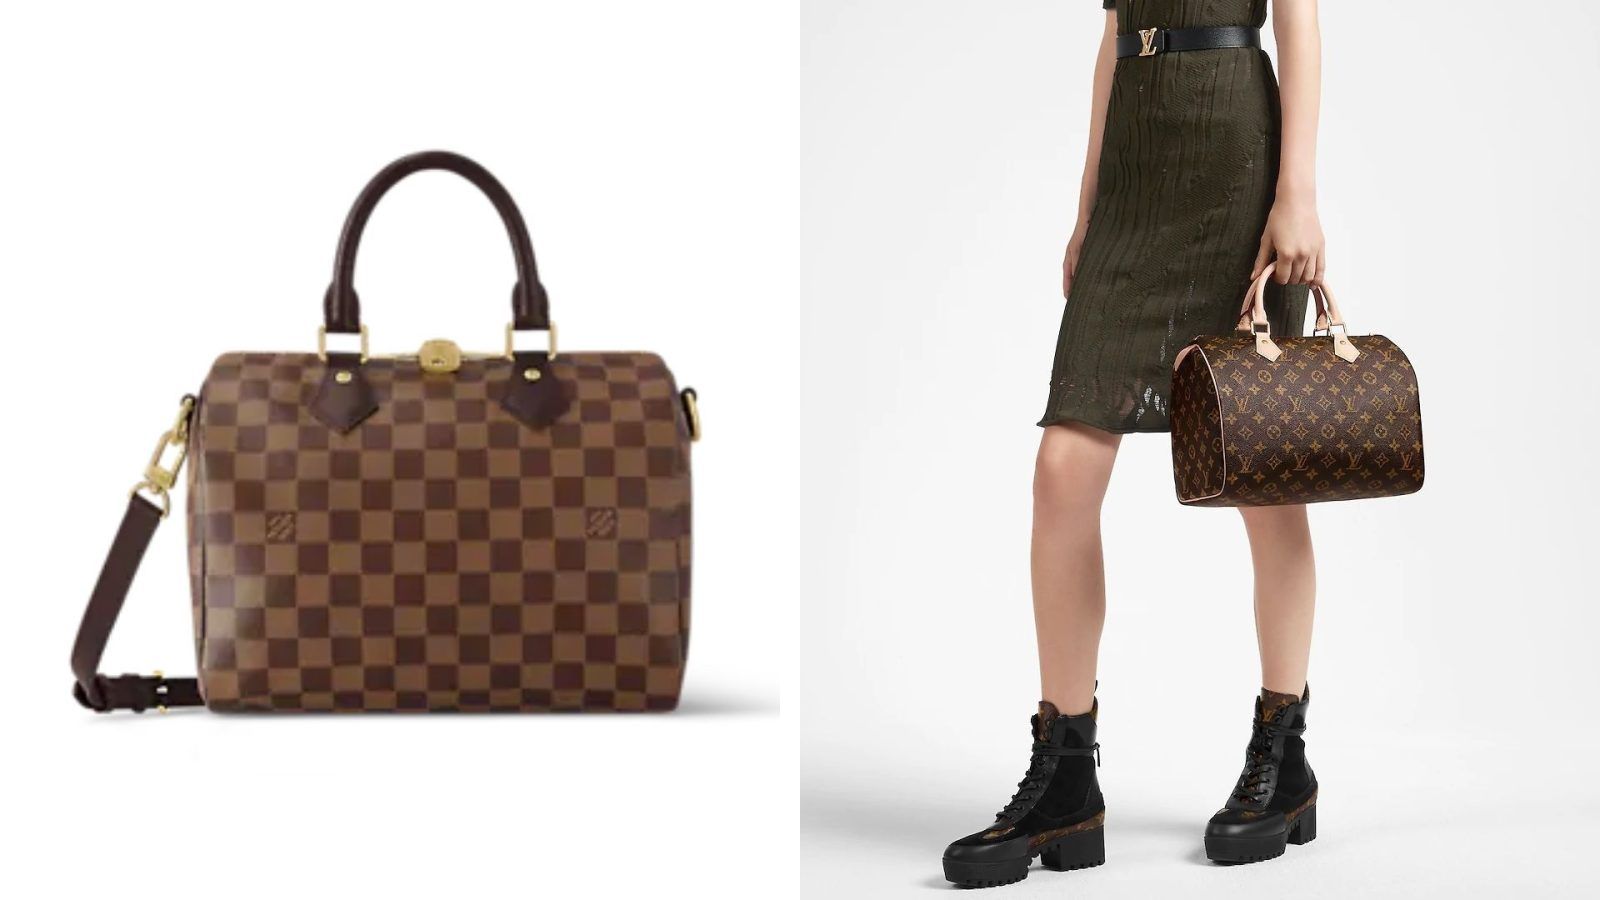 9 of the most iconic women's bags and their storied history